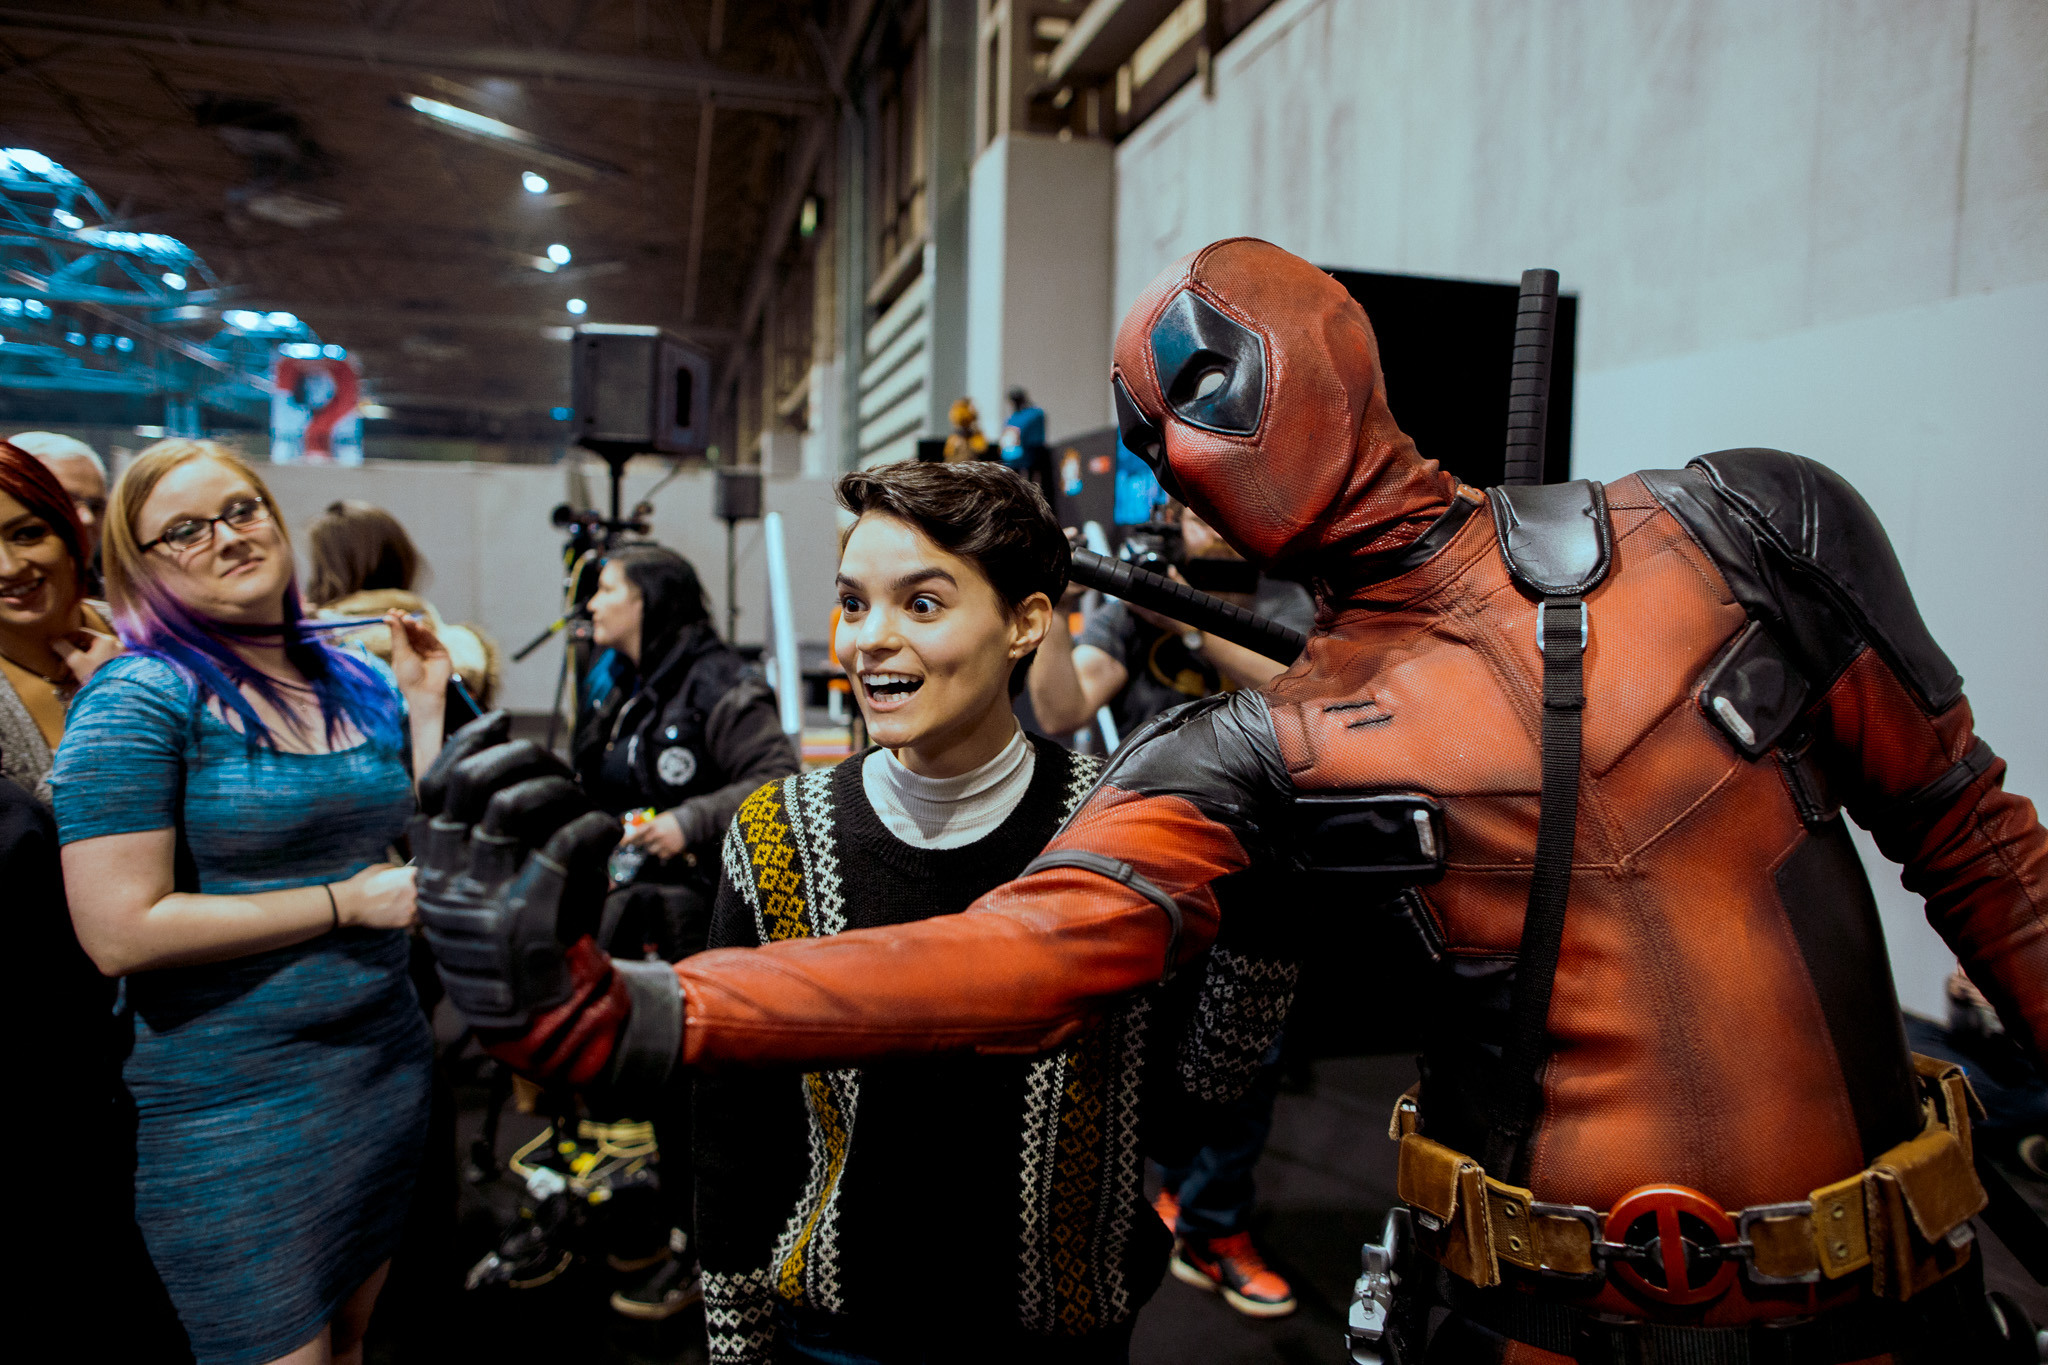 Attendees at Comic Con taking a photo with Deadpool